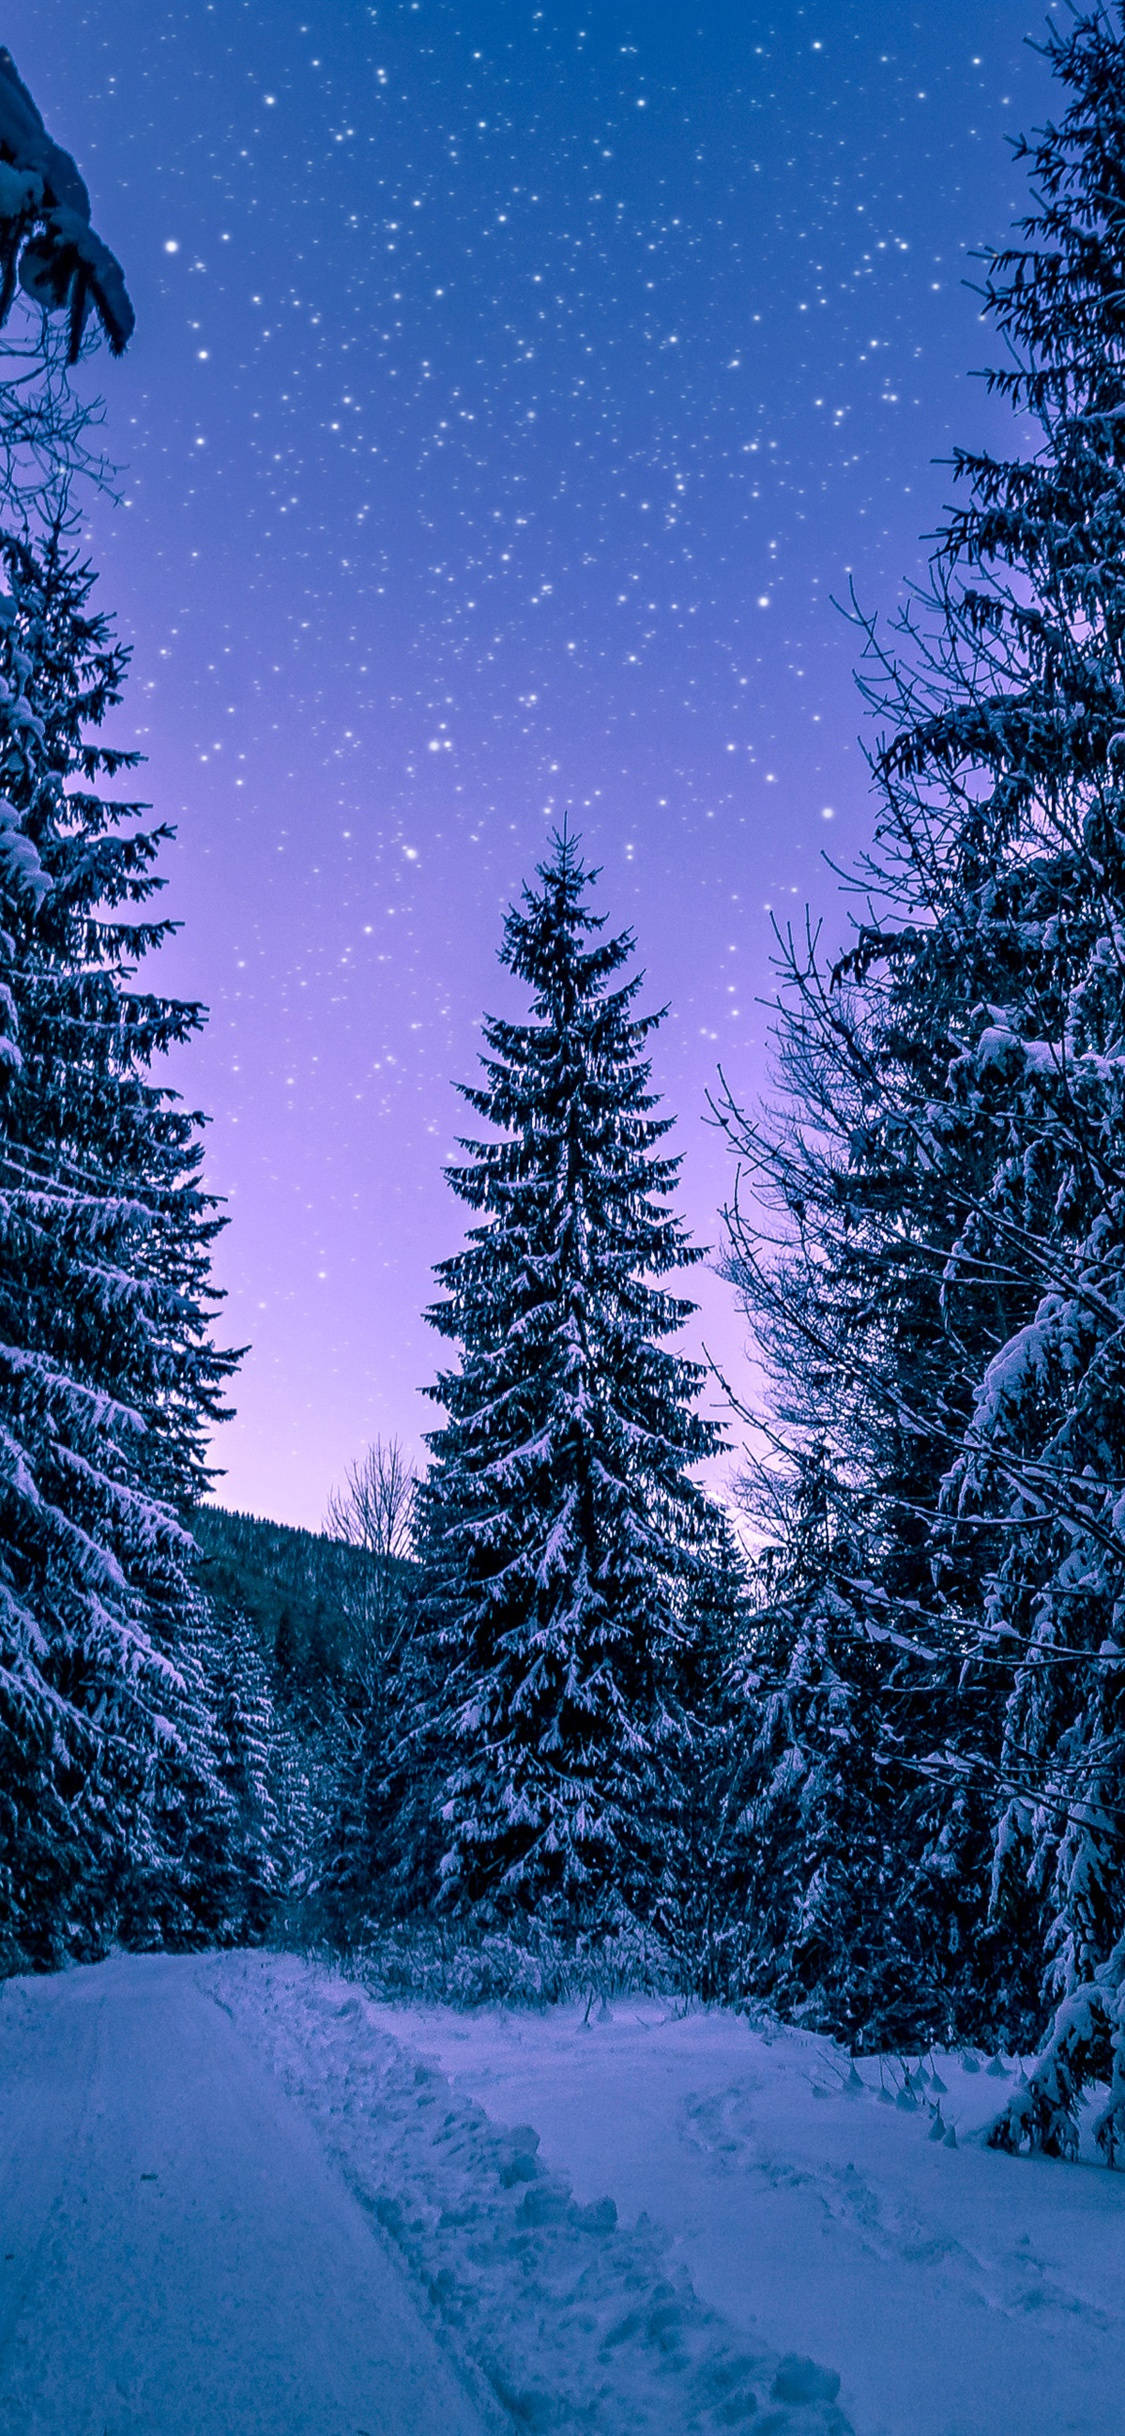 Download Dreamy Winter Forest iPhone Wallpaper